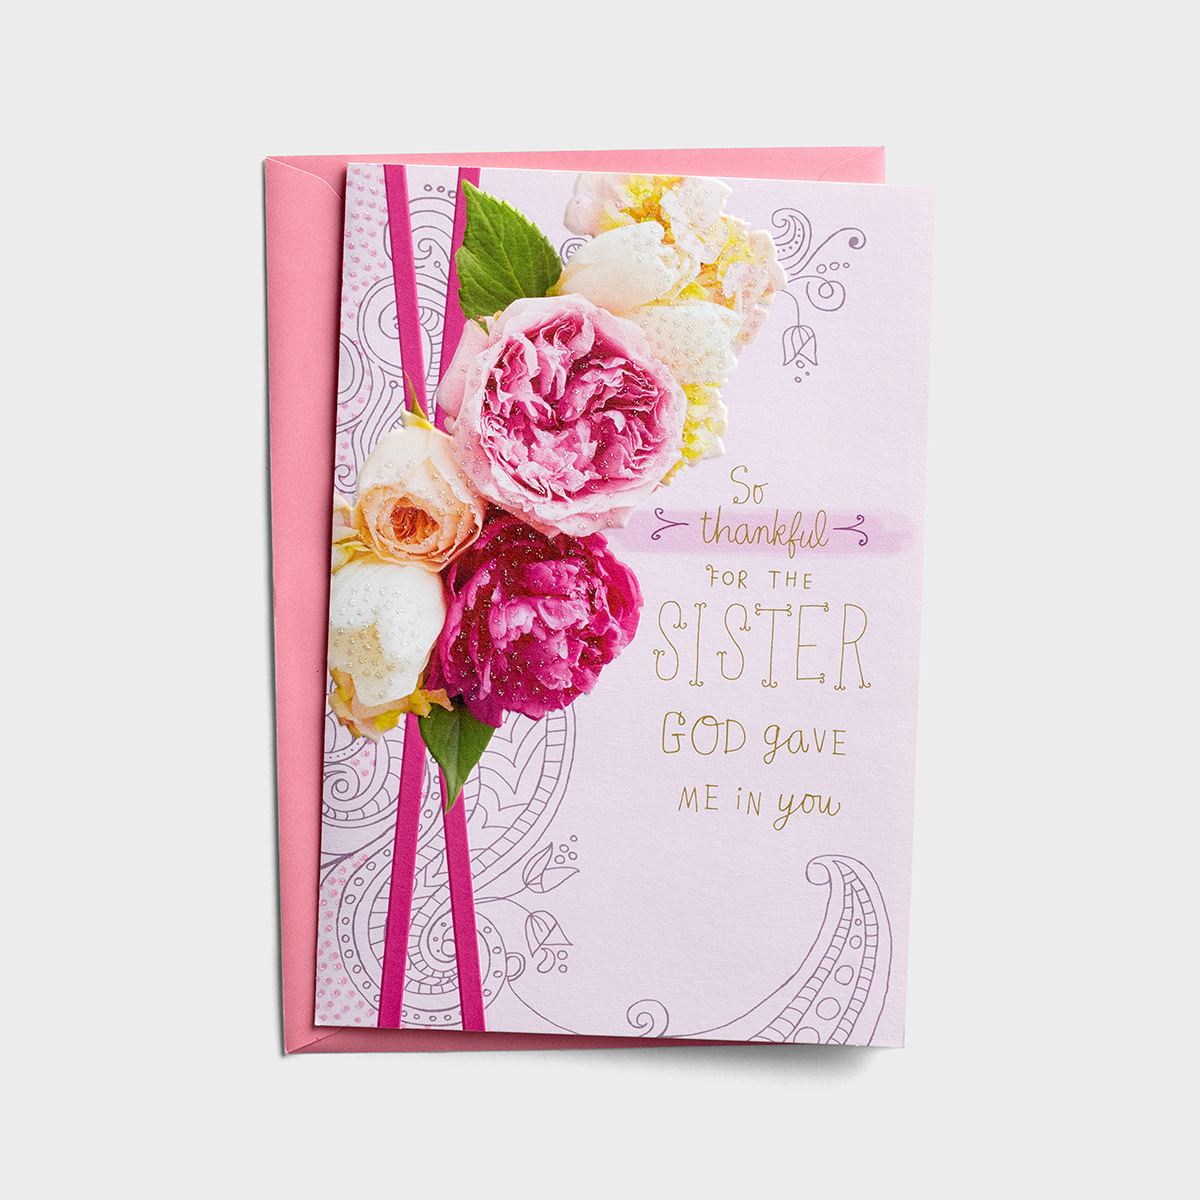 Mother's Day - For the Sister God Gave Me - 1 Premium Card